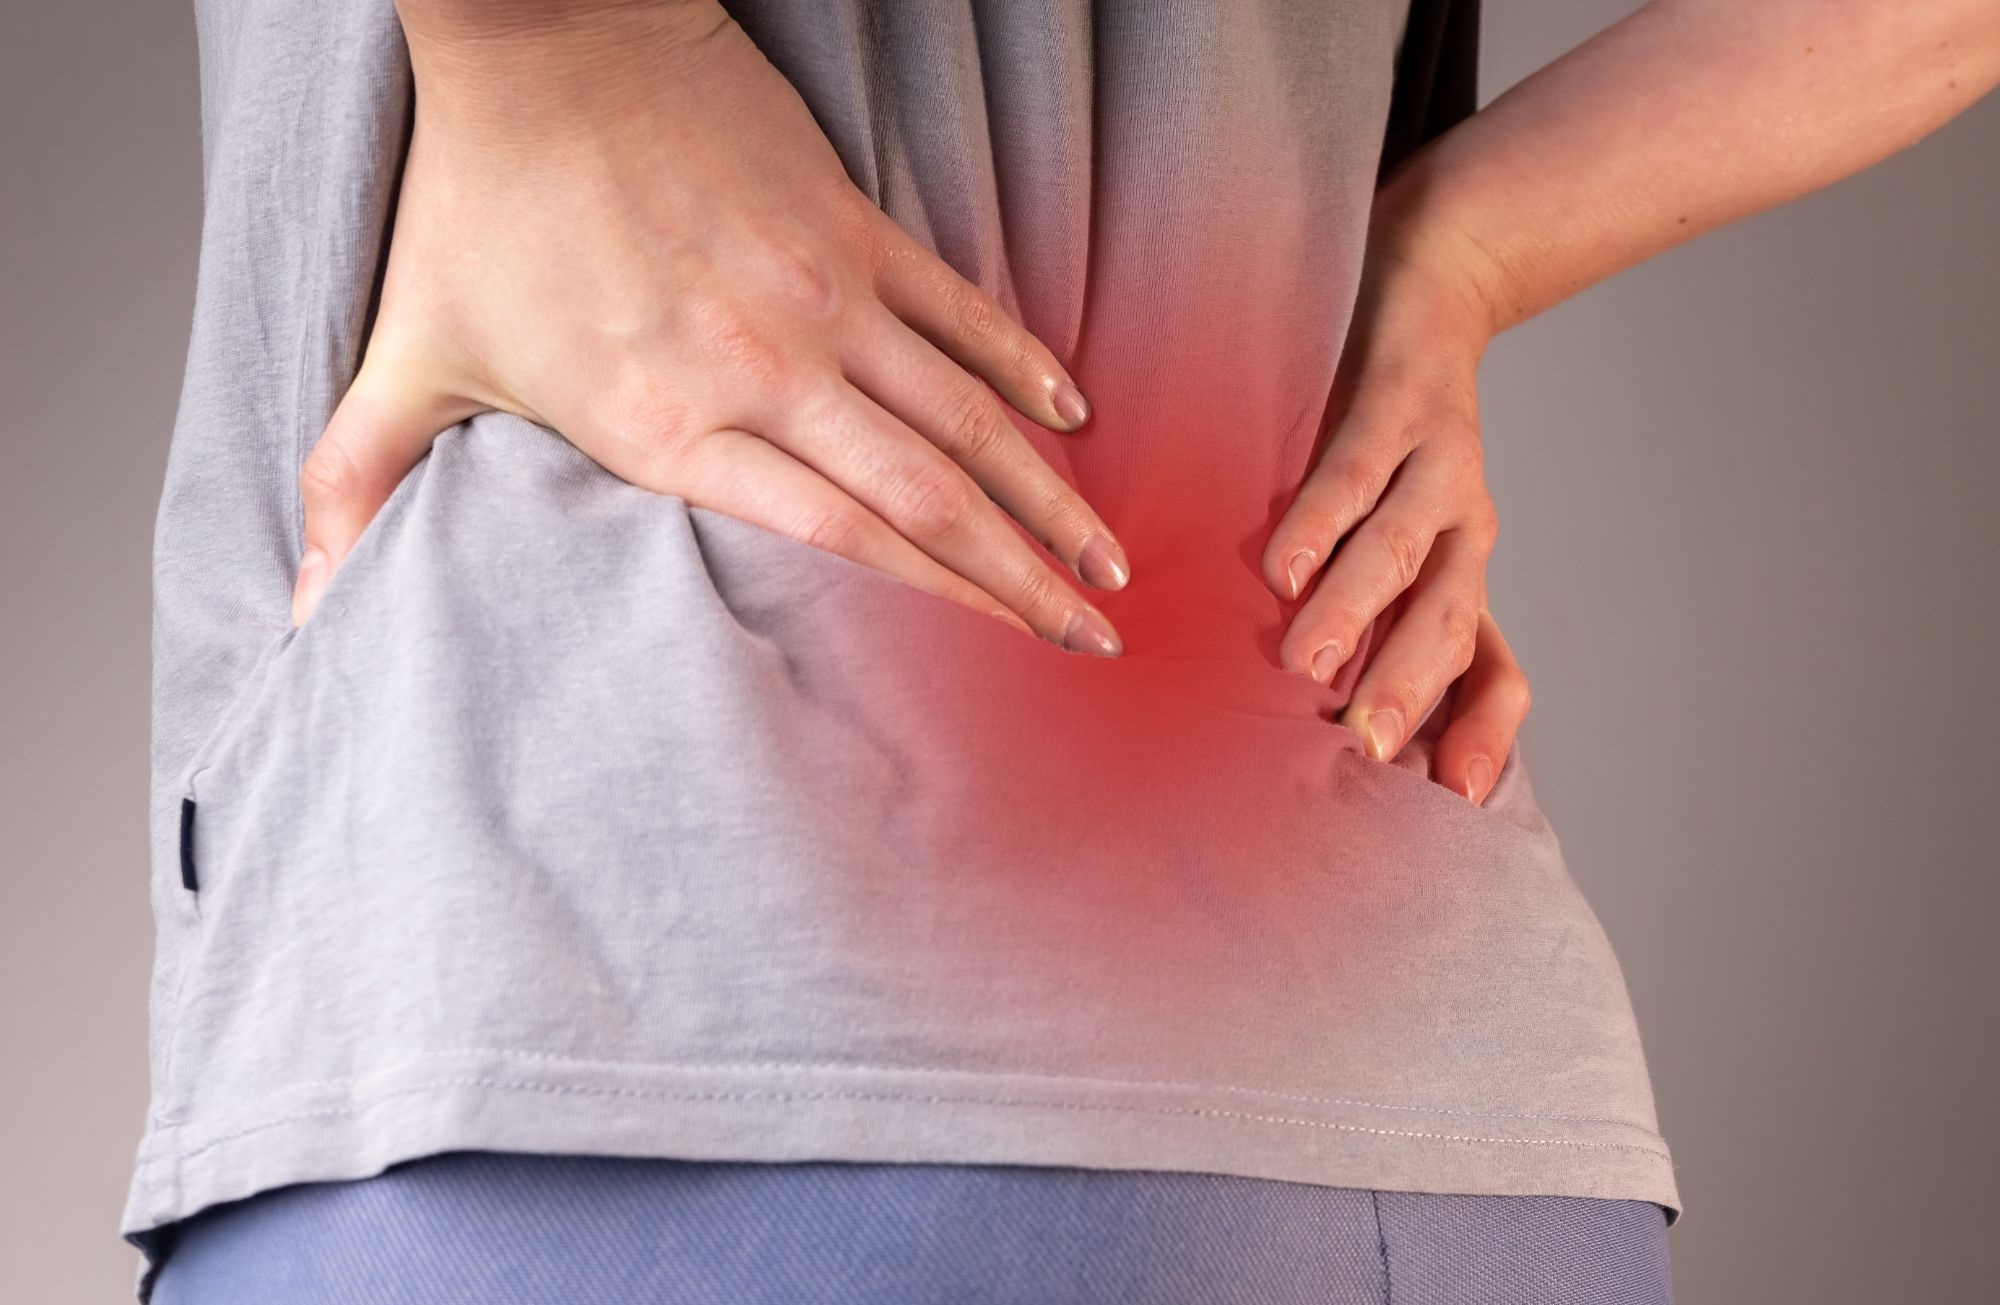 What Are The Signs Of Sciatica Improving And How To Speed Up The Recovery?